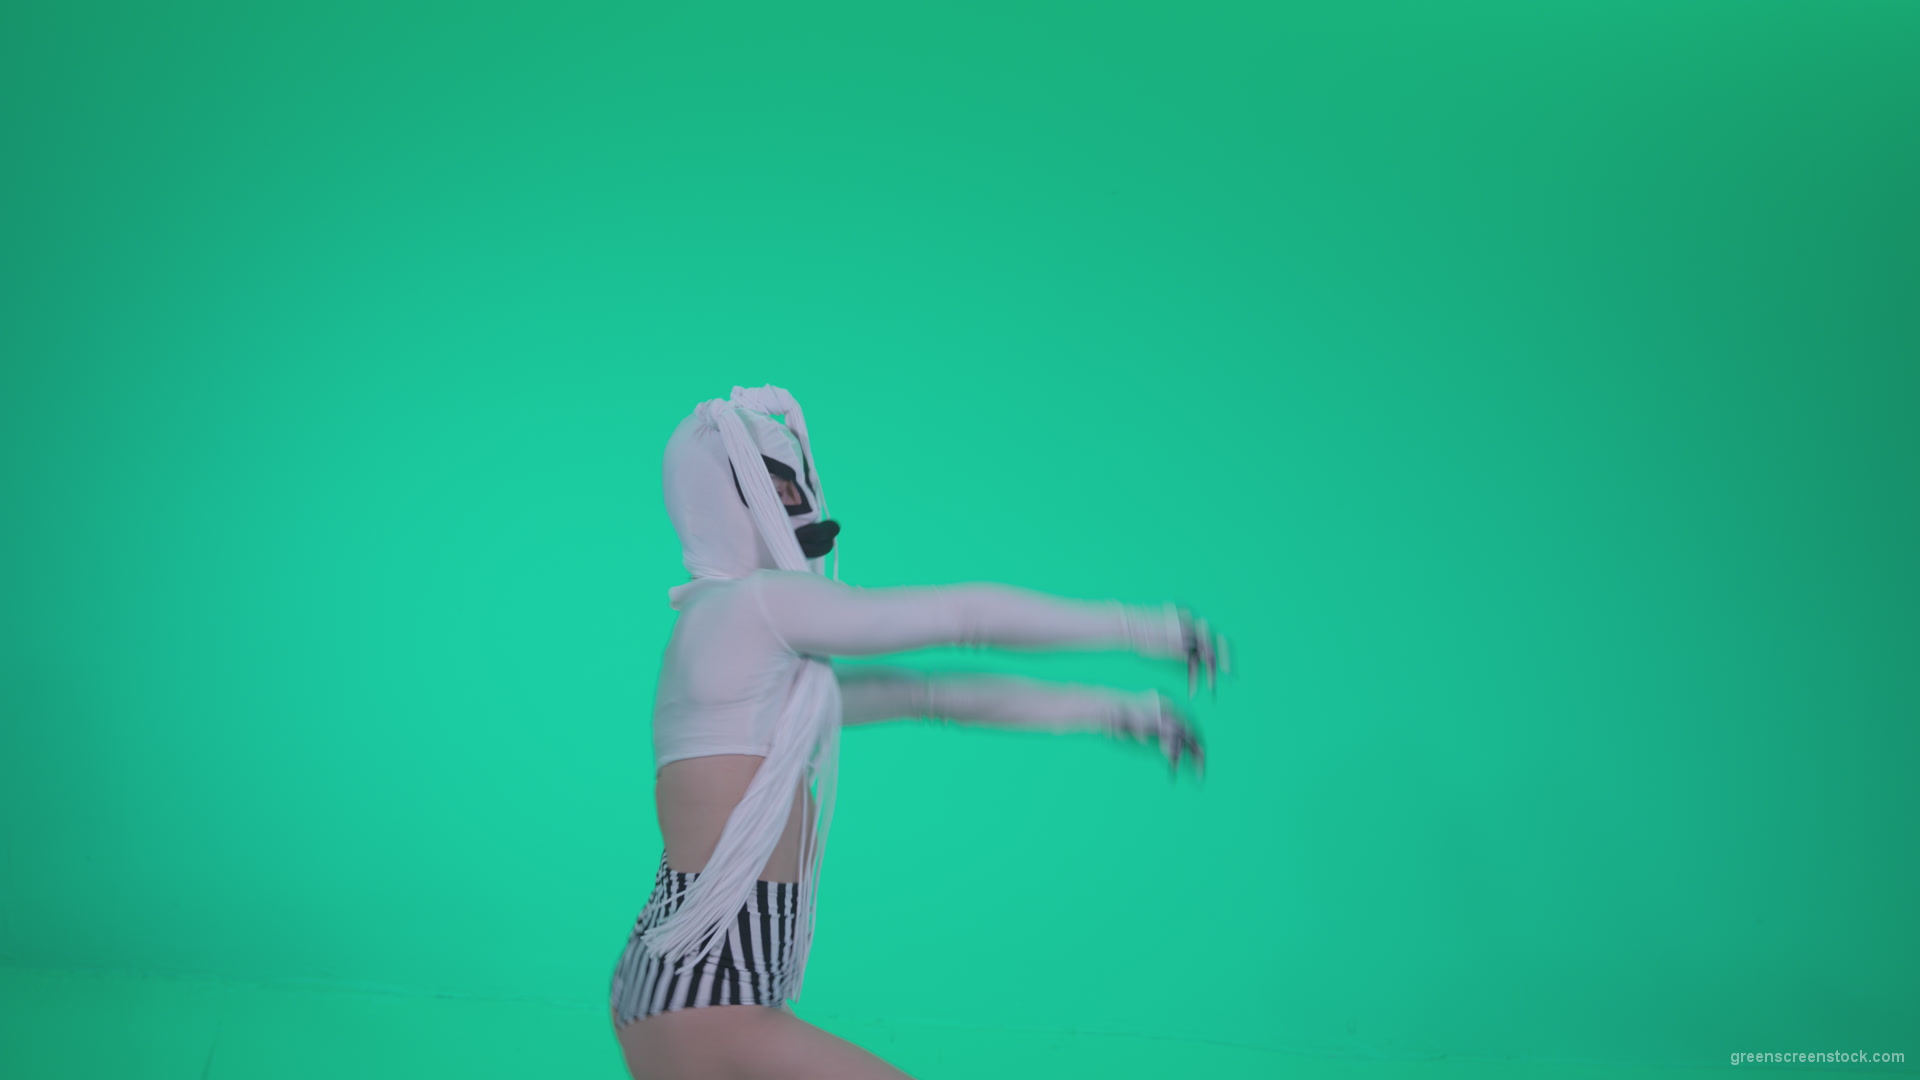 Go-go-Dancer-with-Latex-Top-t9-Green-Screen-Video-Footage_001 Green Screen Stock